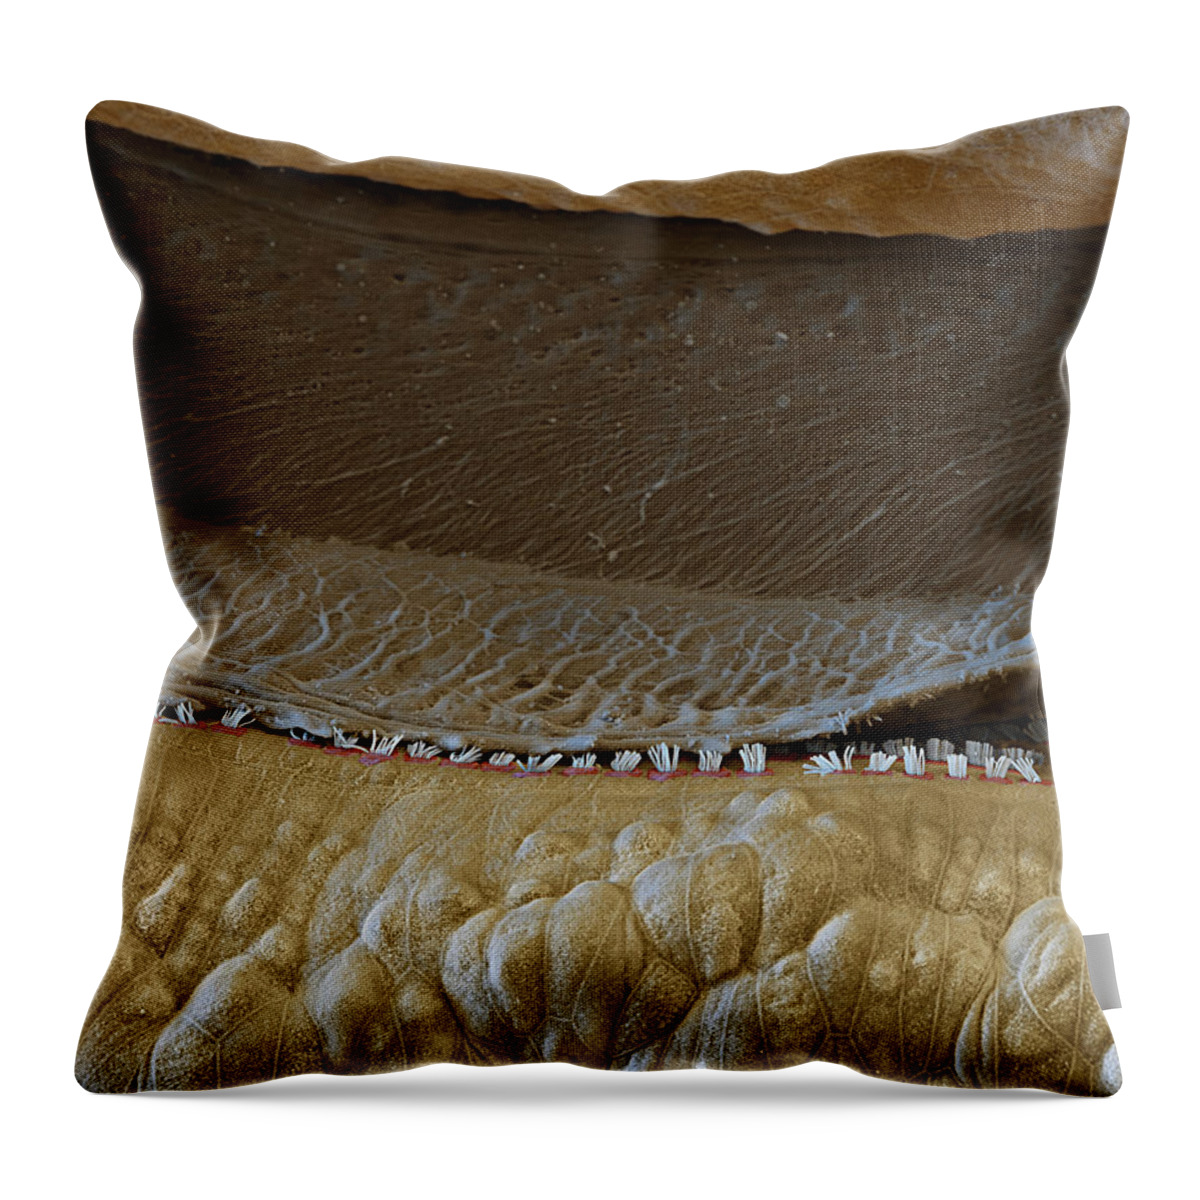 Cochlea Throw Pillow featuring the photograph Cochlea, Tectorial Membrane, Sem #4 by Oliver Meckes EYE OF SCIENCE